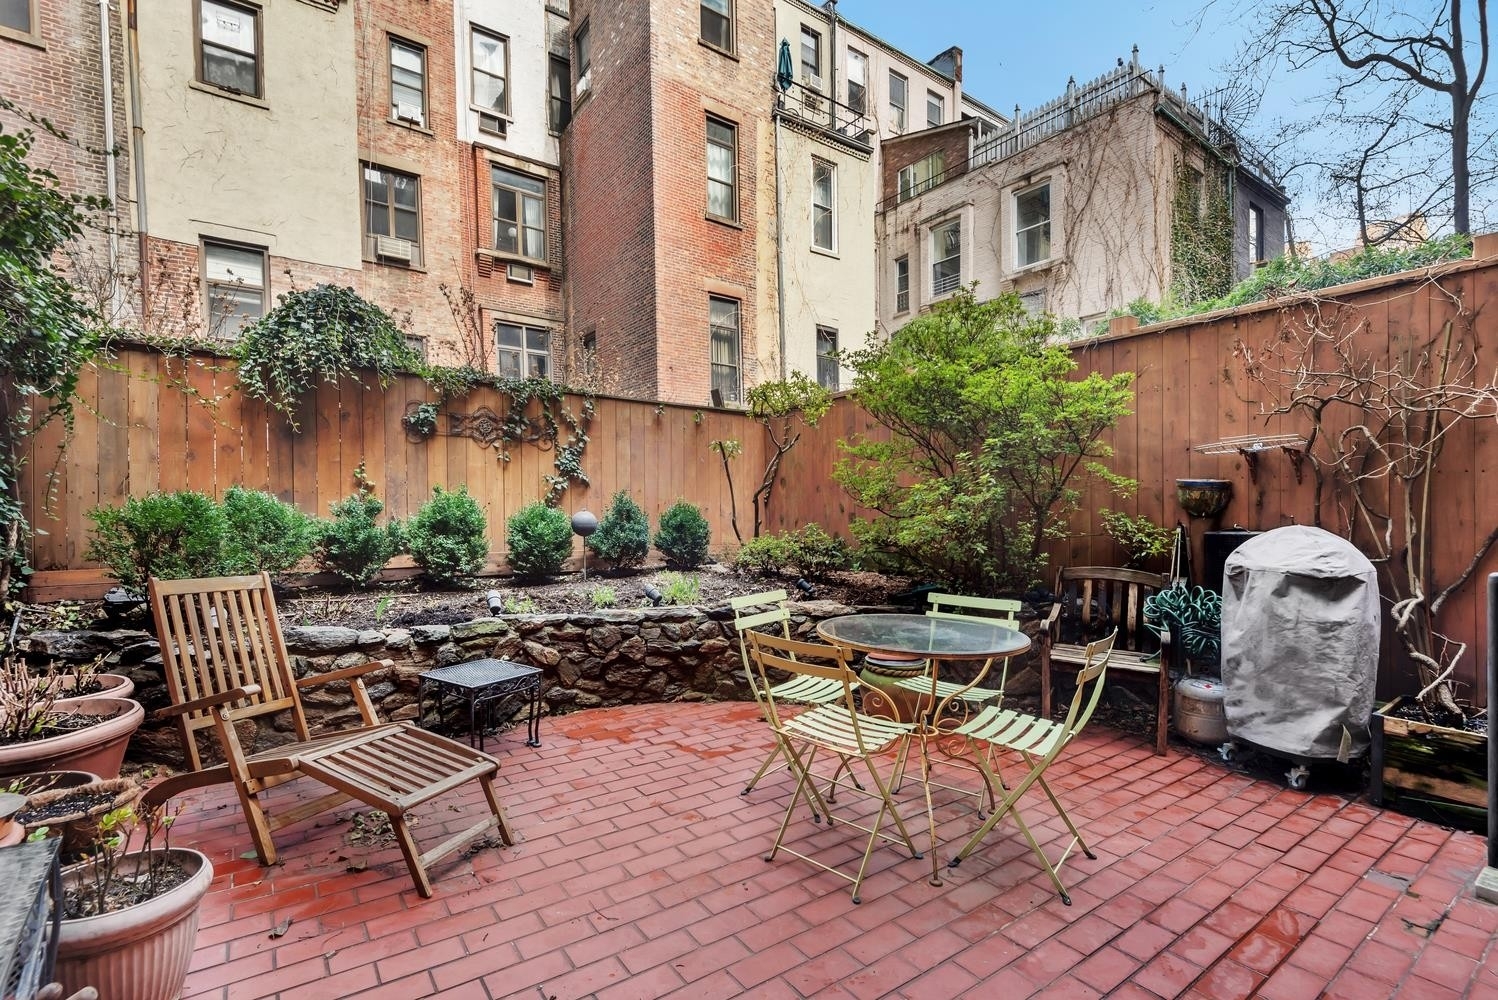 Co-op Properties for Sale at 129 W 70TH ST, 1 Lincoln Square, New York, New York 10023